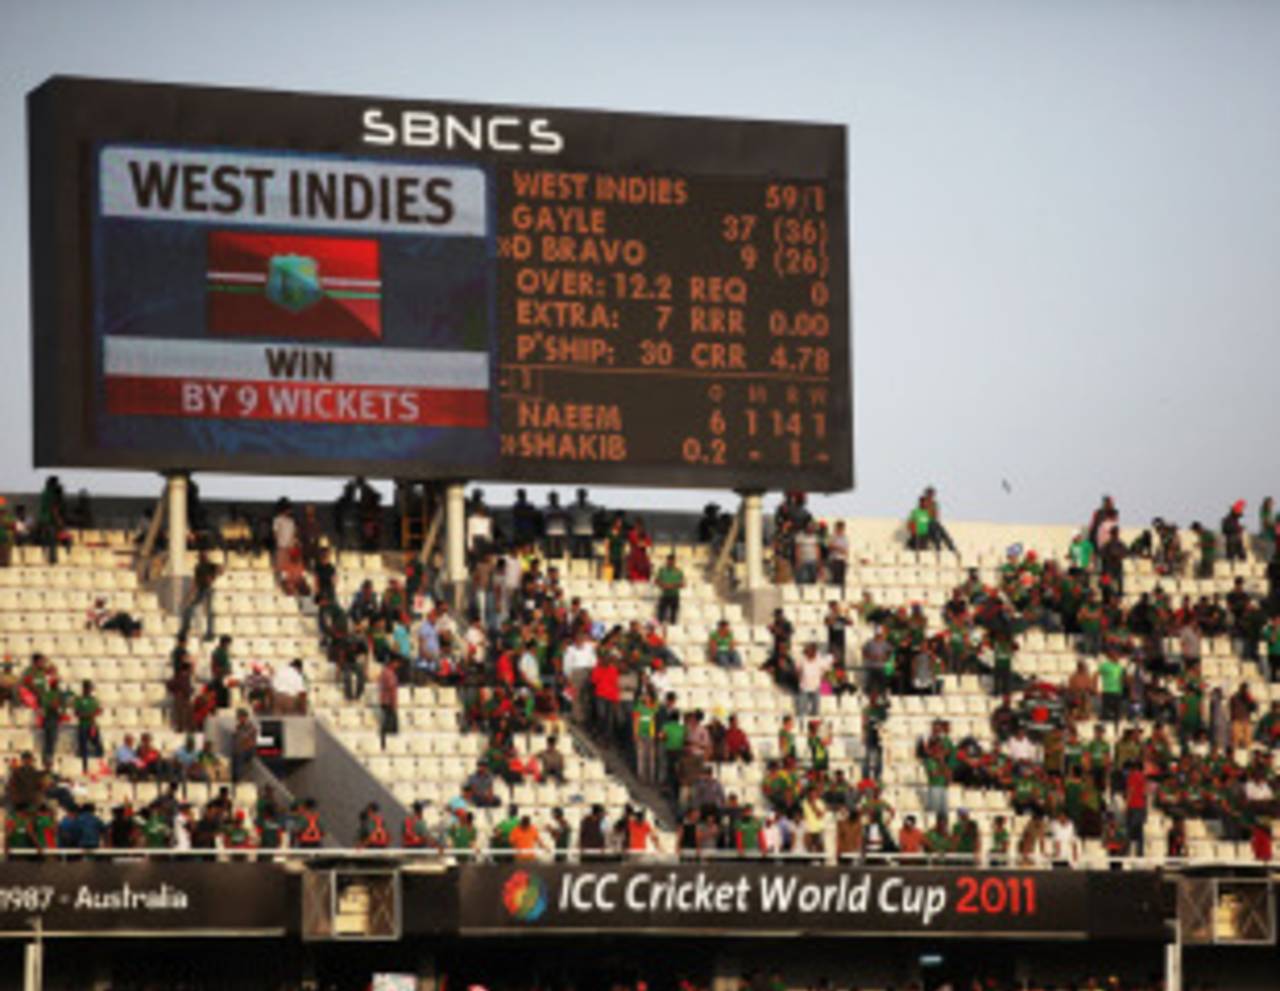 The Mirpur crowd were not too pleased with Bangladesh's poor showing, Bangladesh v West Indies, Group B, World Cup 2011, Mirpur, March 4, 2011